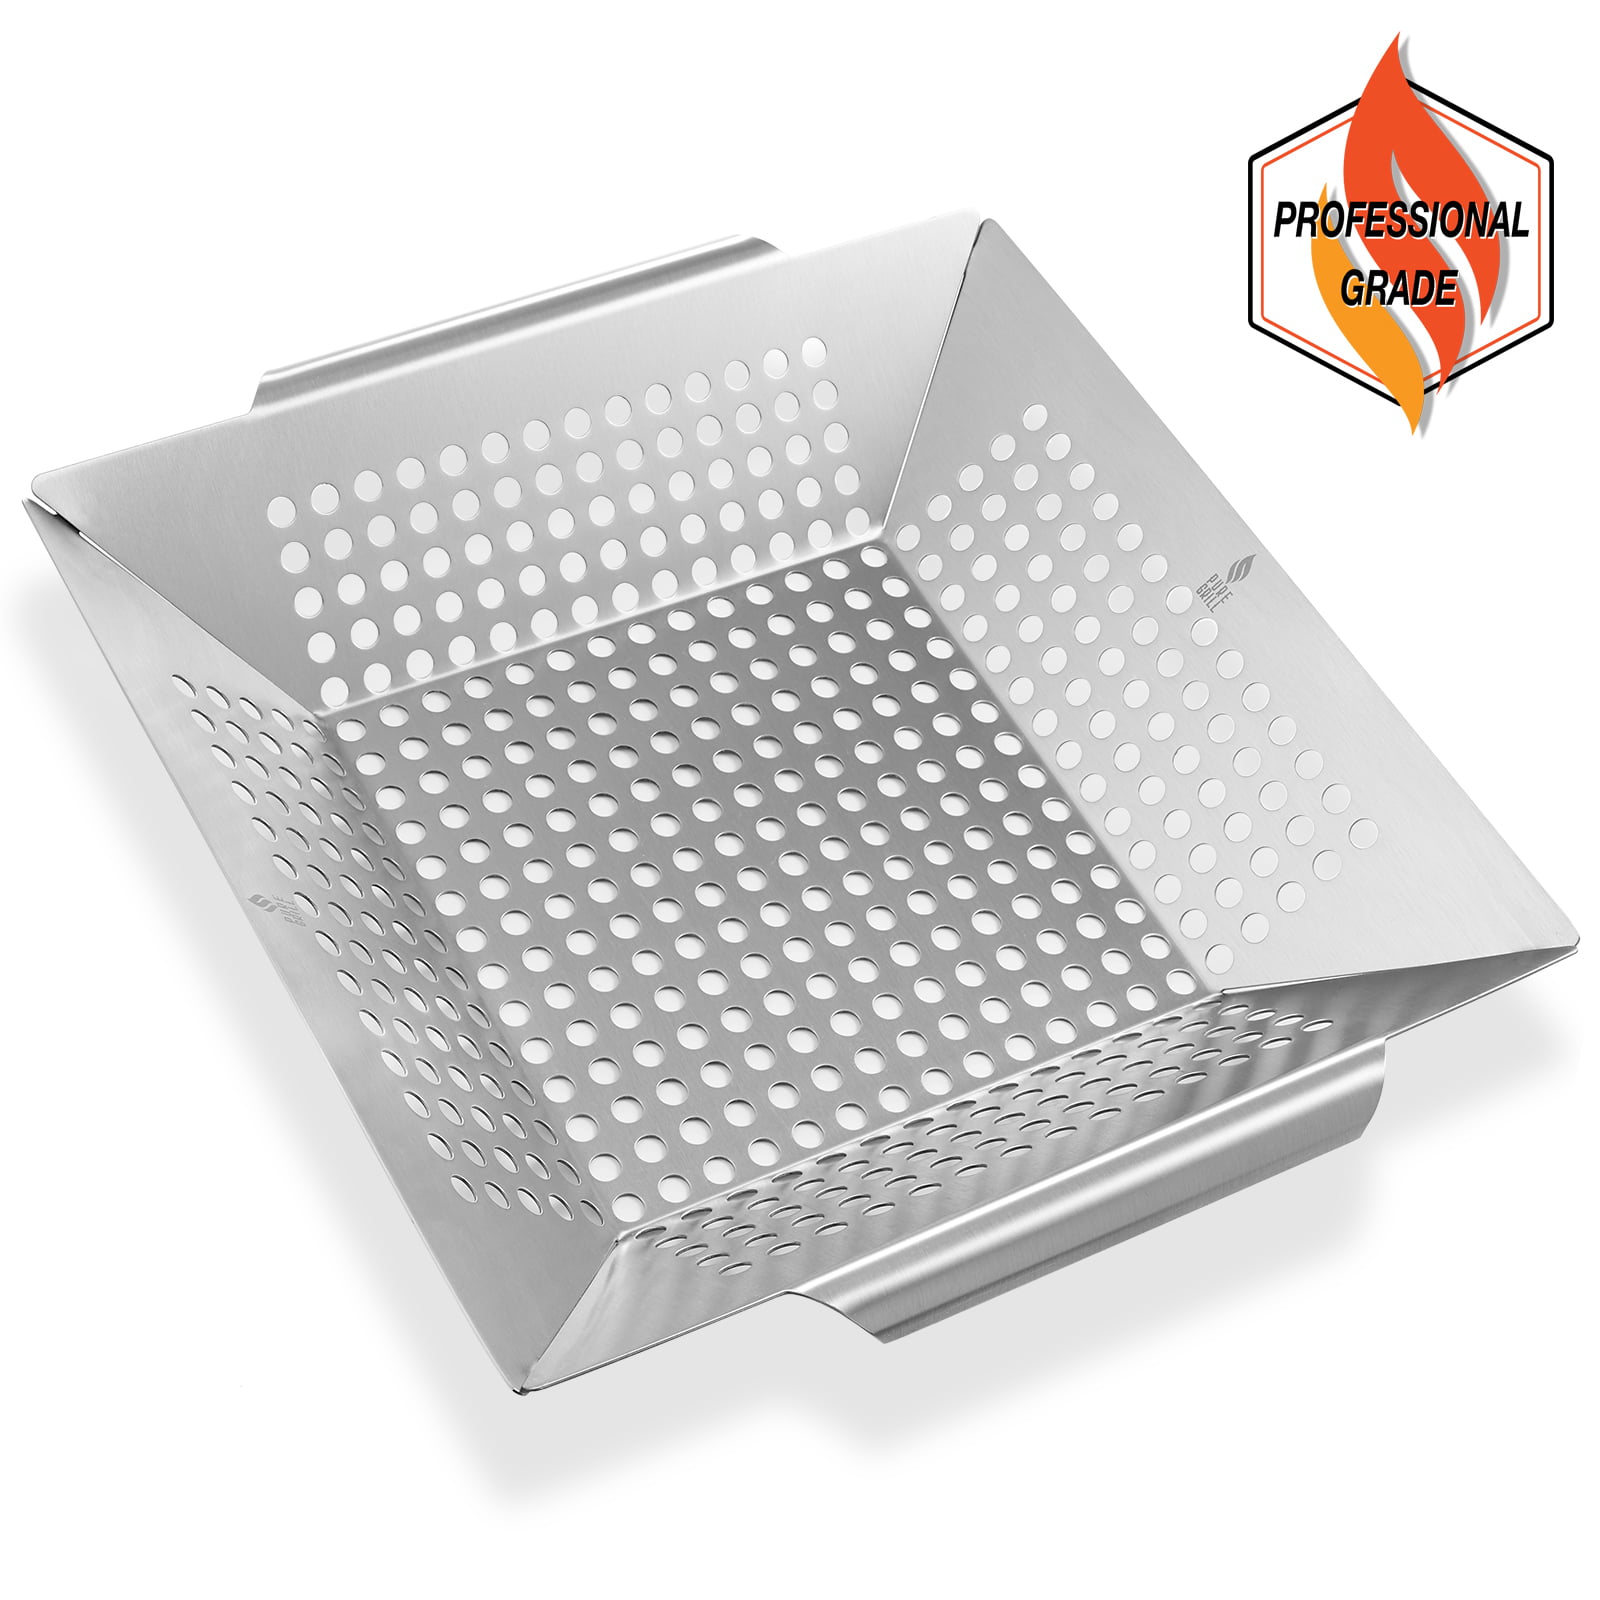 BBQ CHOICE All Purpose Rectangular Stainless Steel Barbecue Grilling Wok 